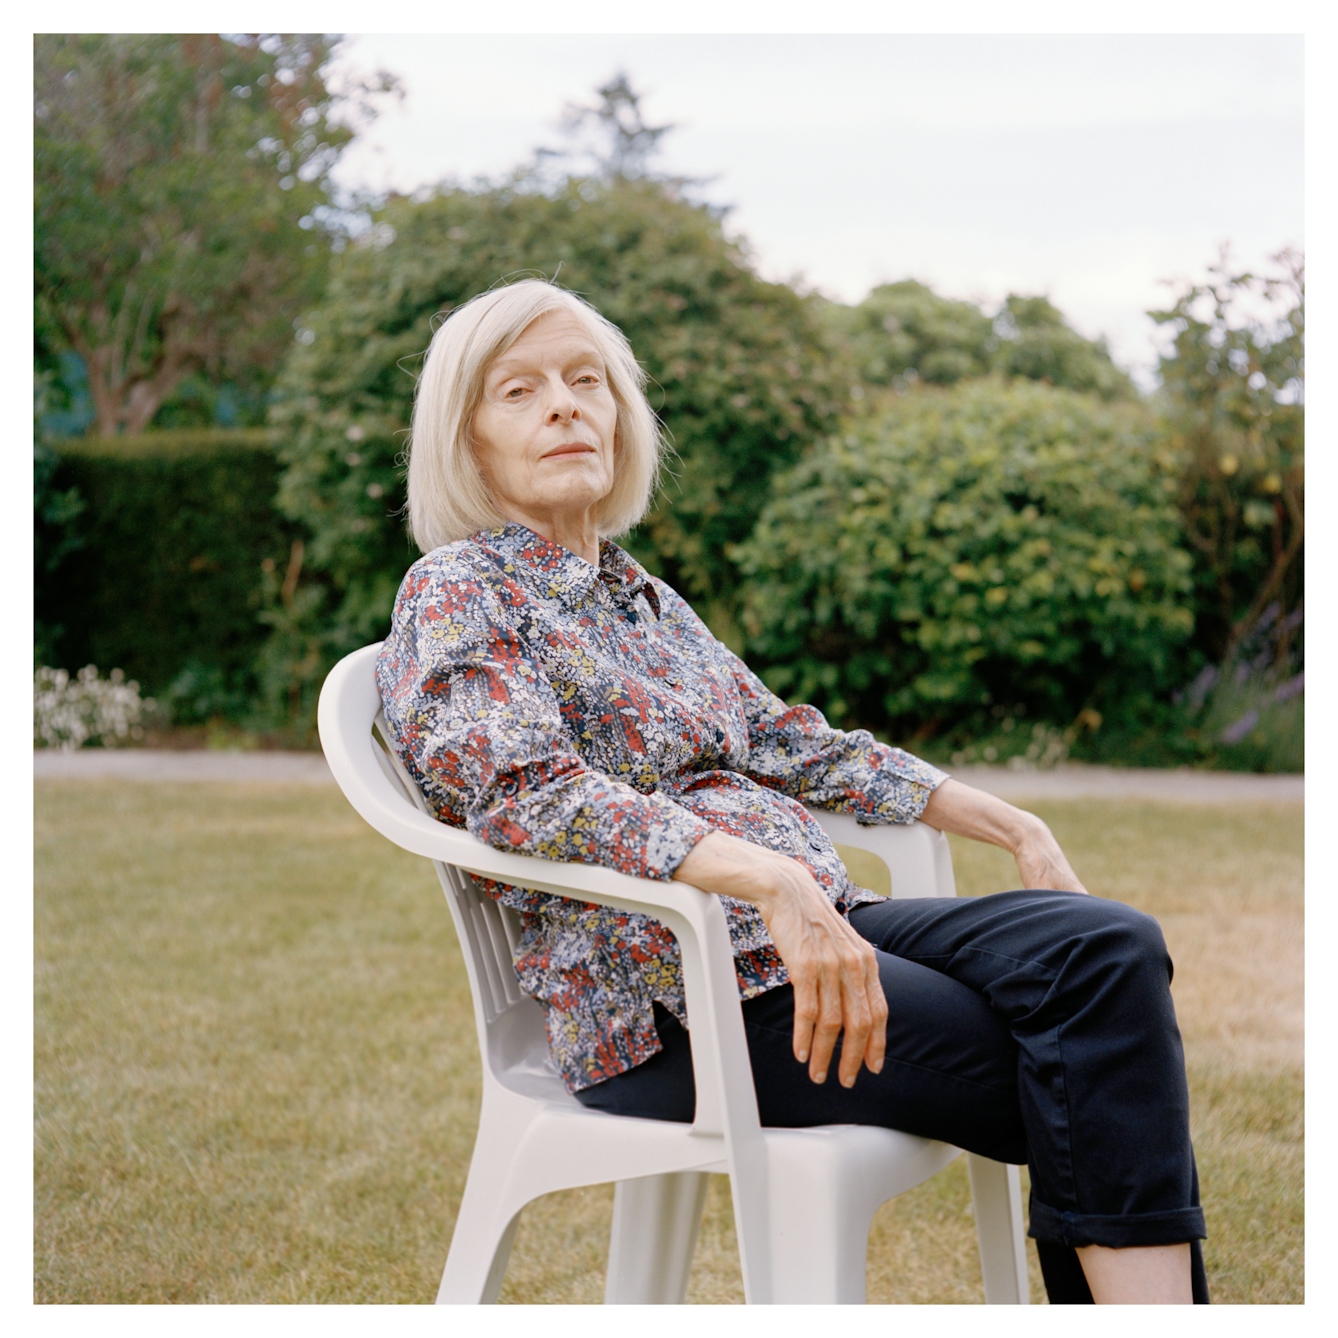 Portrait photograph of Margaret, an older woman with grey shoulder length hair. She is sitting in a white plastic garden chair in a garden.

Her body is sat sideways, with her head turned to face towards the camera. Her arms are resting on the chair arms. 

She is wearing a floral patterned shirt and black trousers. She is looking directly at the camera, with a neutral expression.